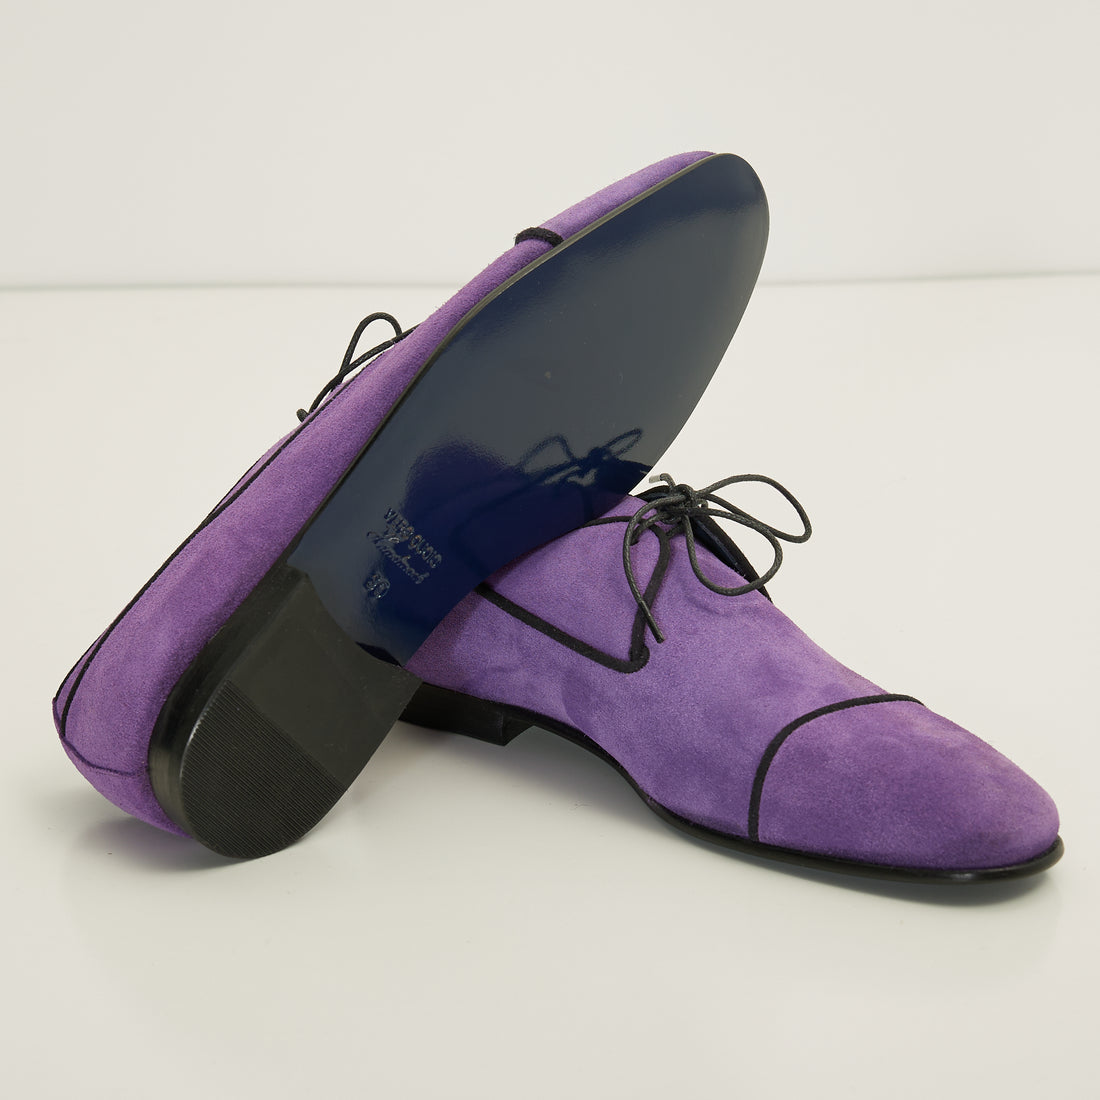 N° D1016 THE FORMAL LEATHER CAP TOE DERBY SHOES  - PURPLE SUEDE